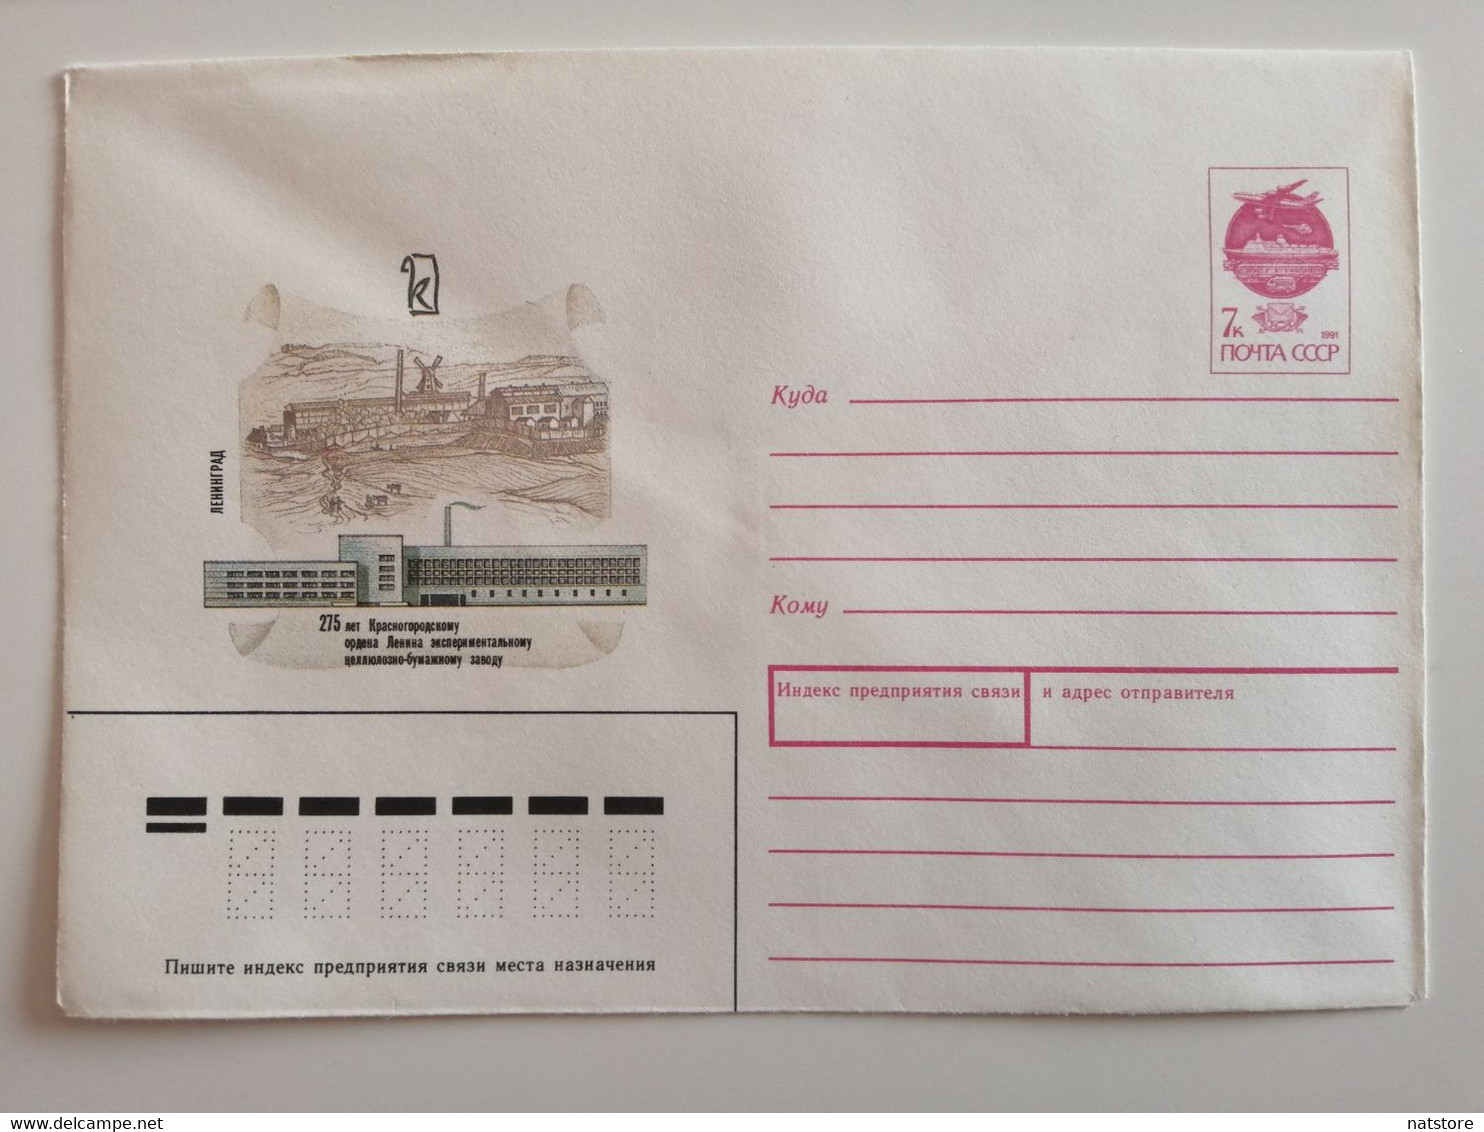 1991..USSR...COVER WITH PRINTED  STAMP..LENINGRAD..275 YEARS OF KRASNOGORODSKY EXPERIMENTAL PULP AND PAPER MILL - Factories & Industries